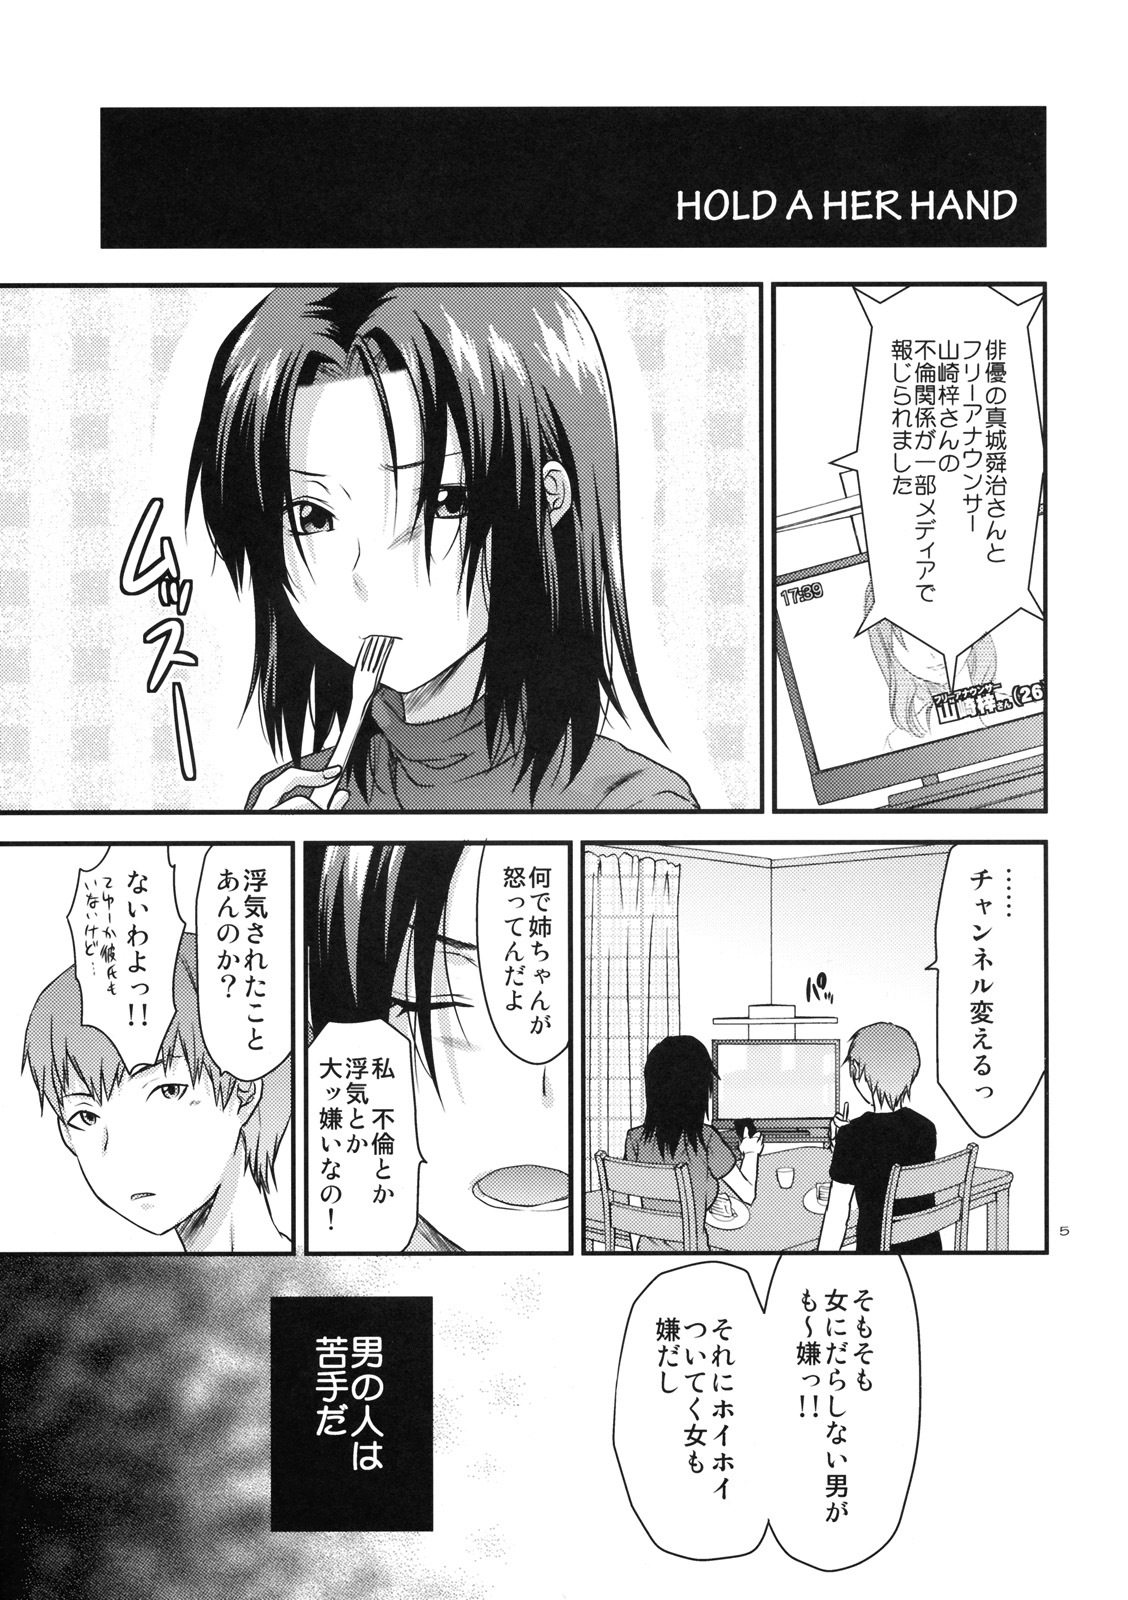 (SC49) [Lv.X+ (Yuzuki N Dash)] Another Another World page 4 full